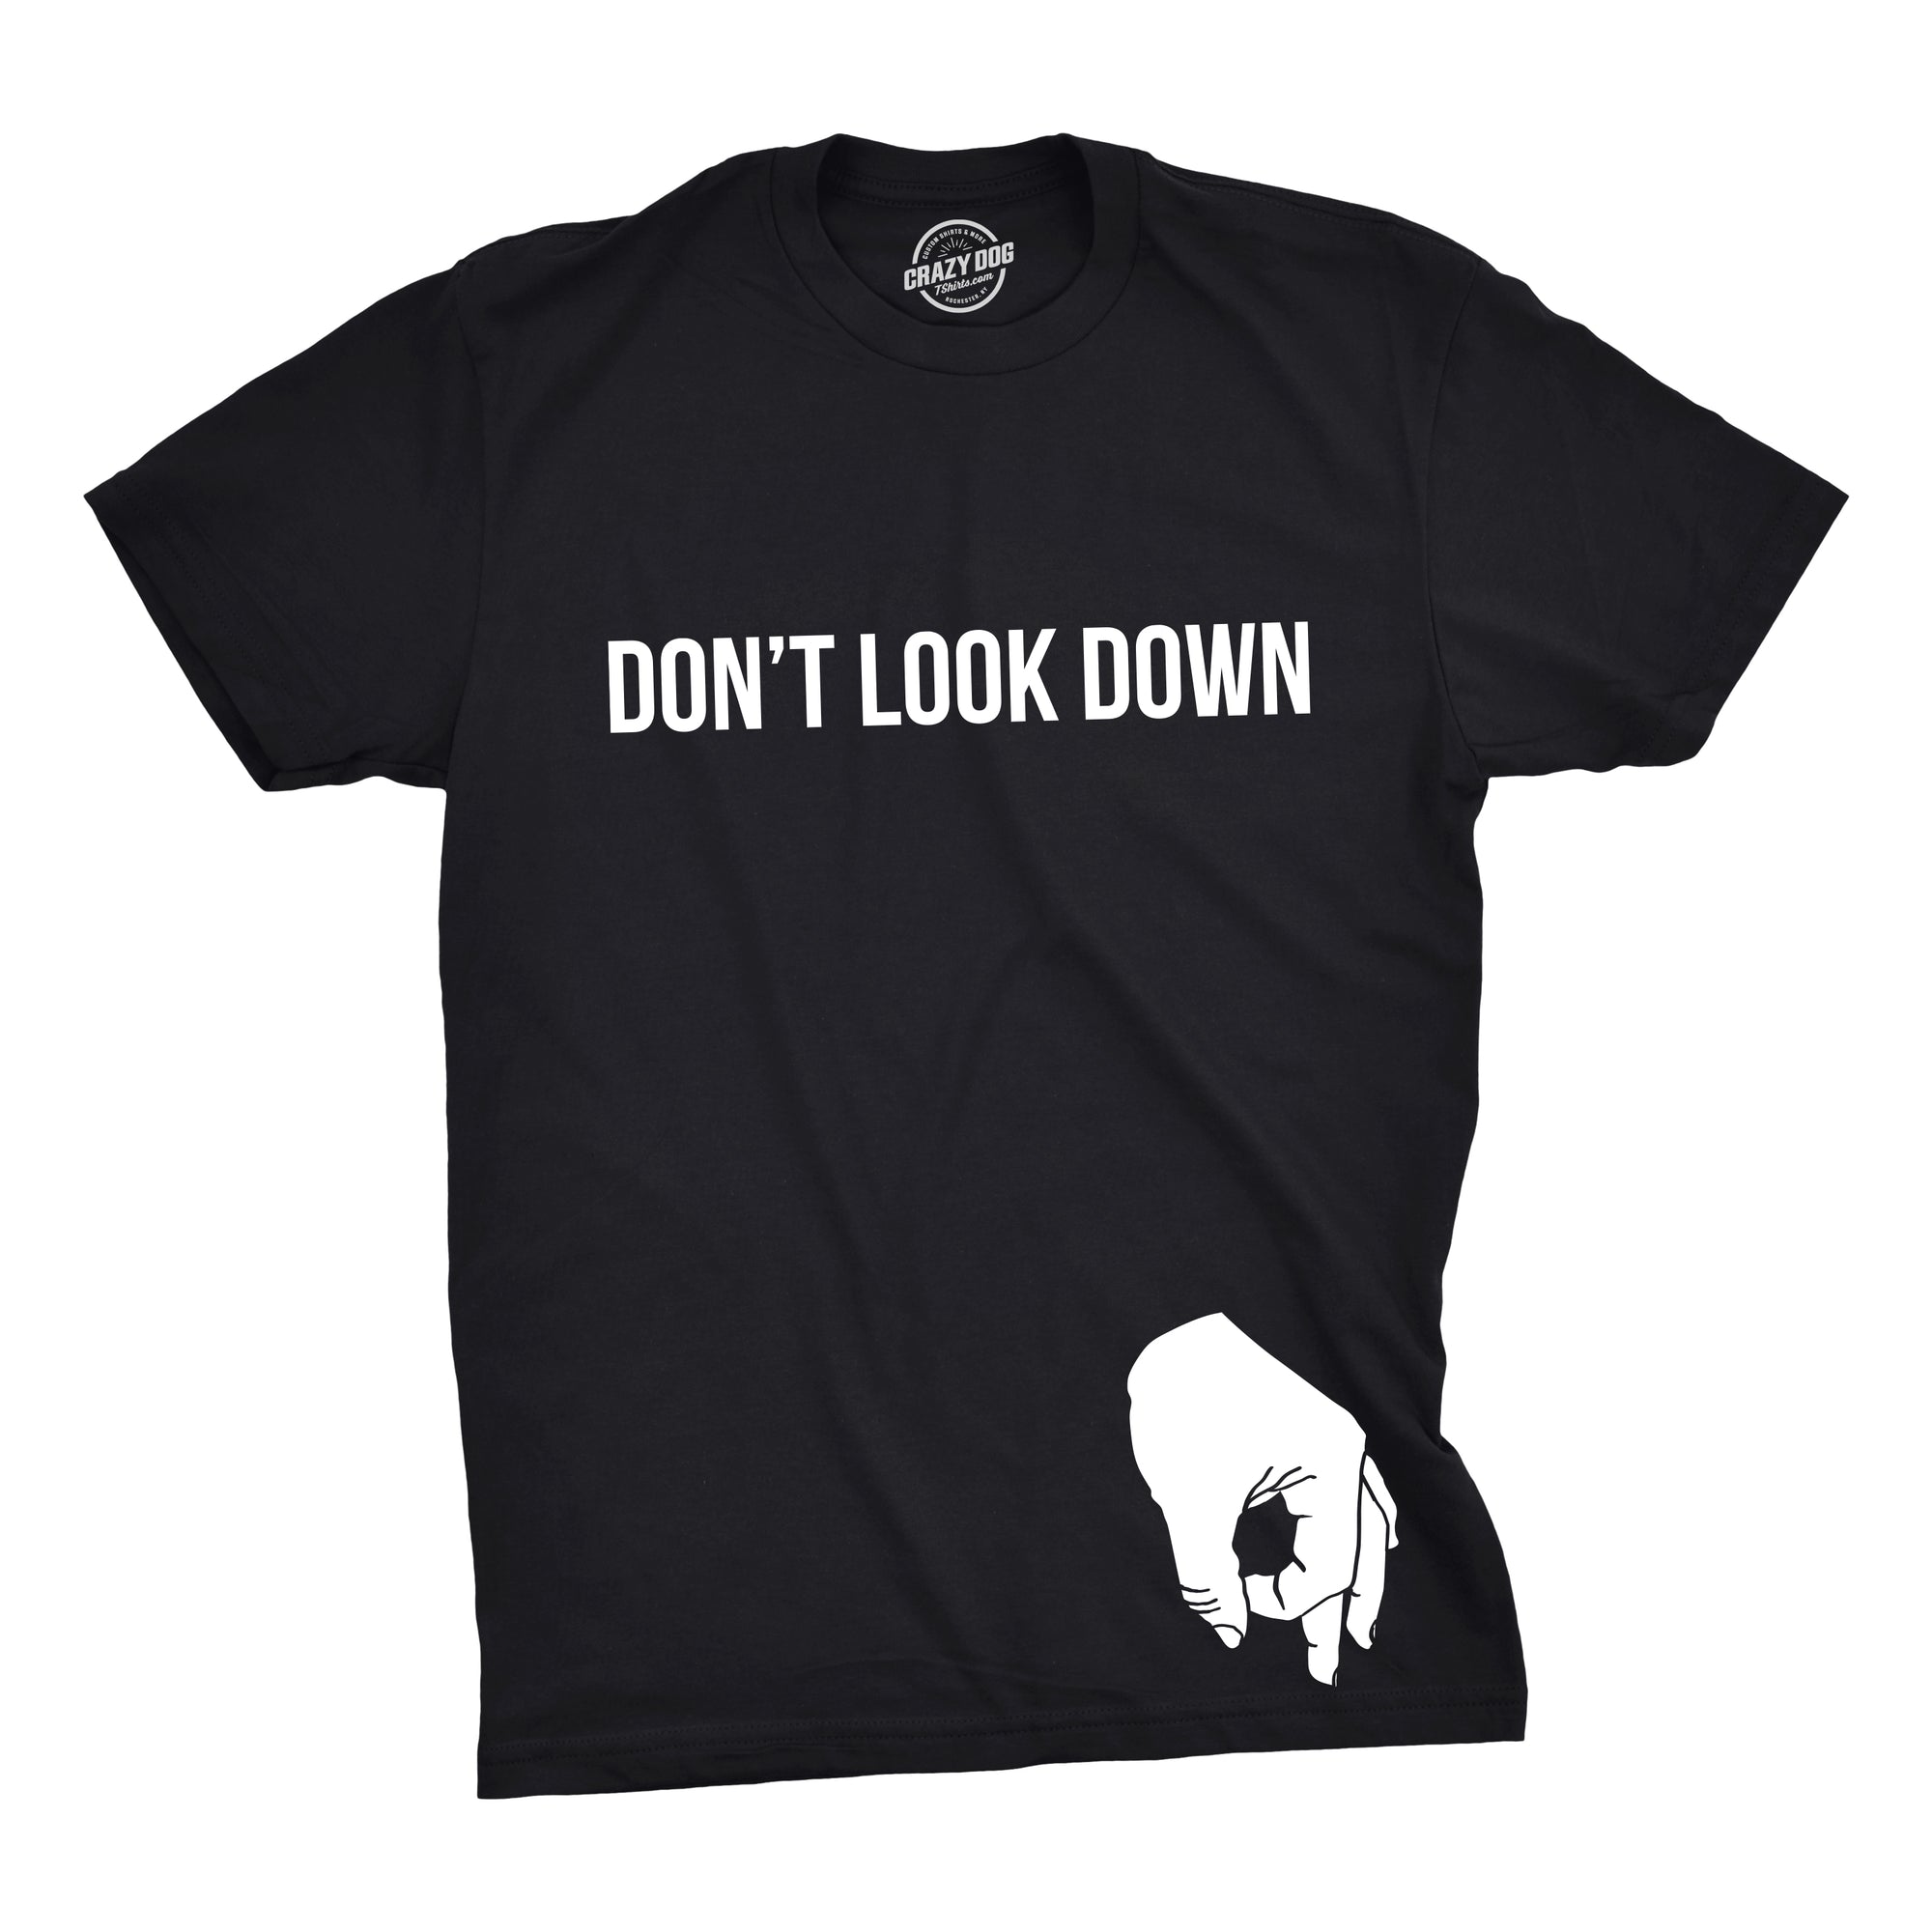 Funny Black Don't Look Down Mens T Shirt Nerdy Sarcastic Tee